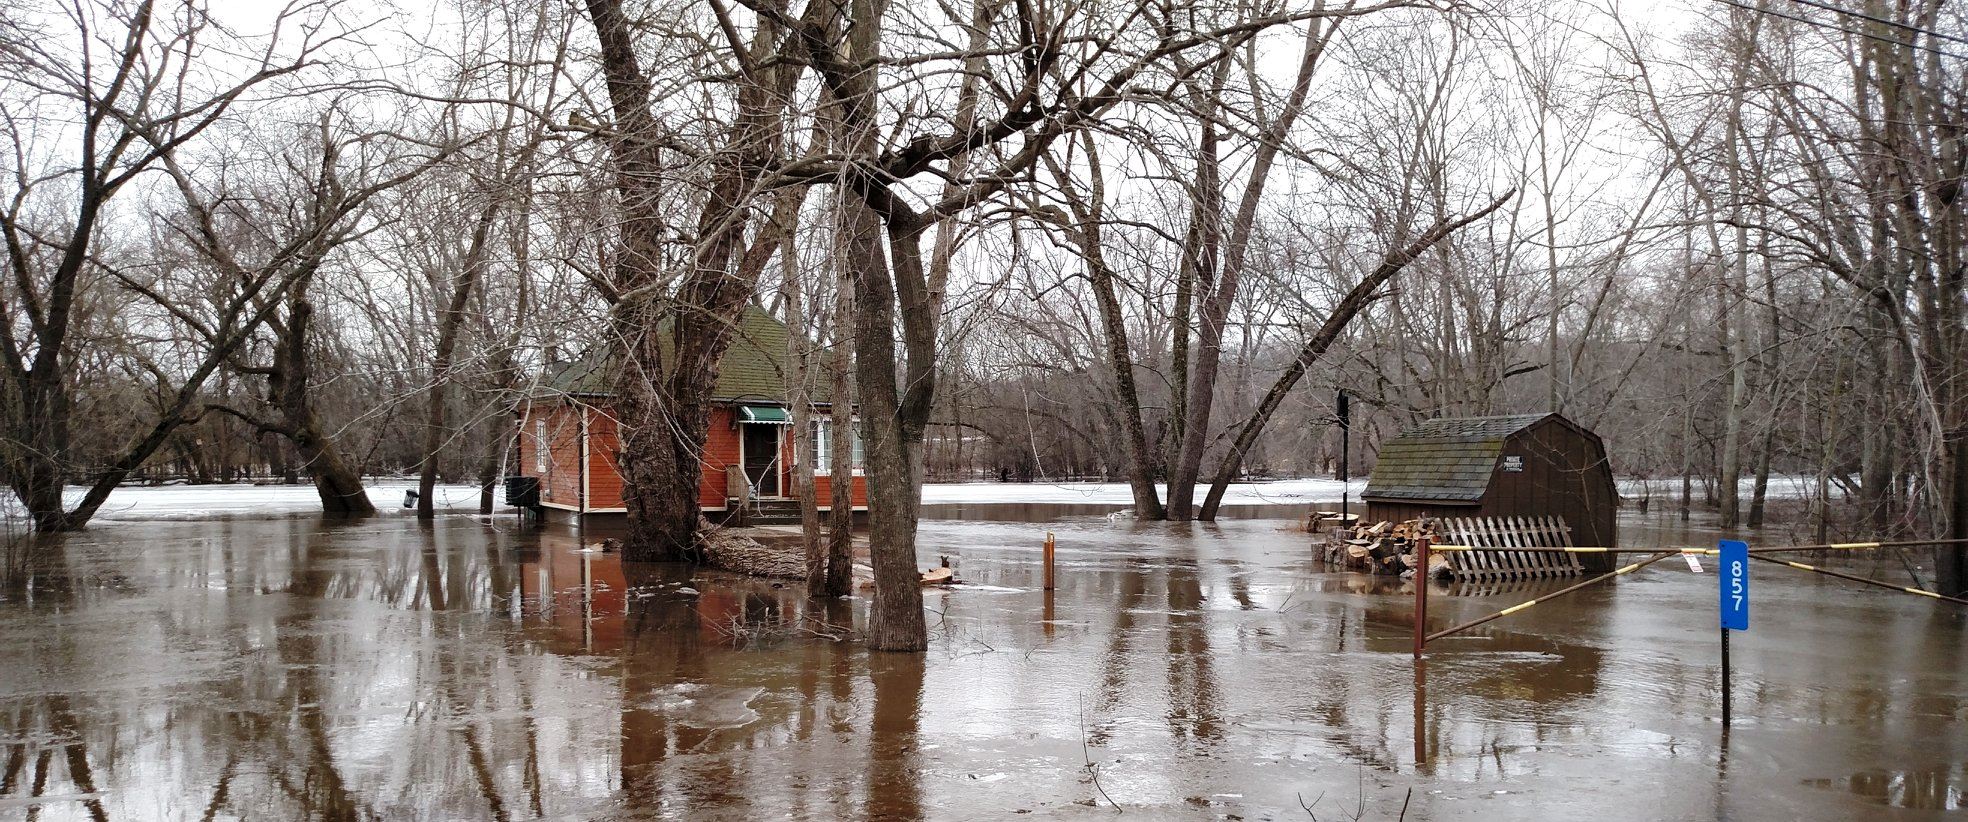 Photo of a flooded house